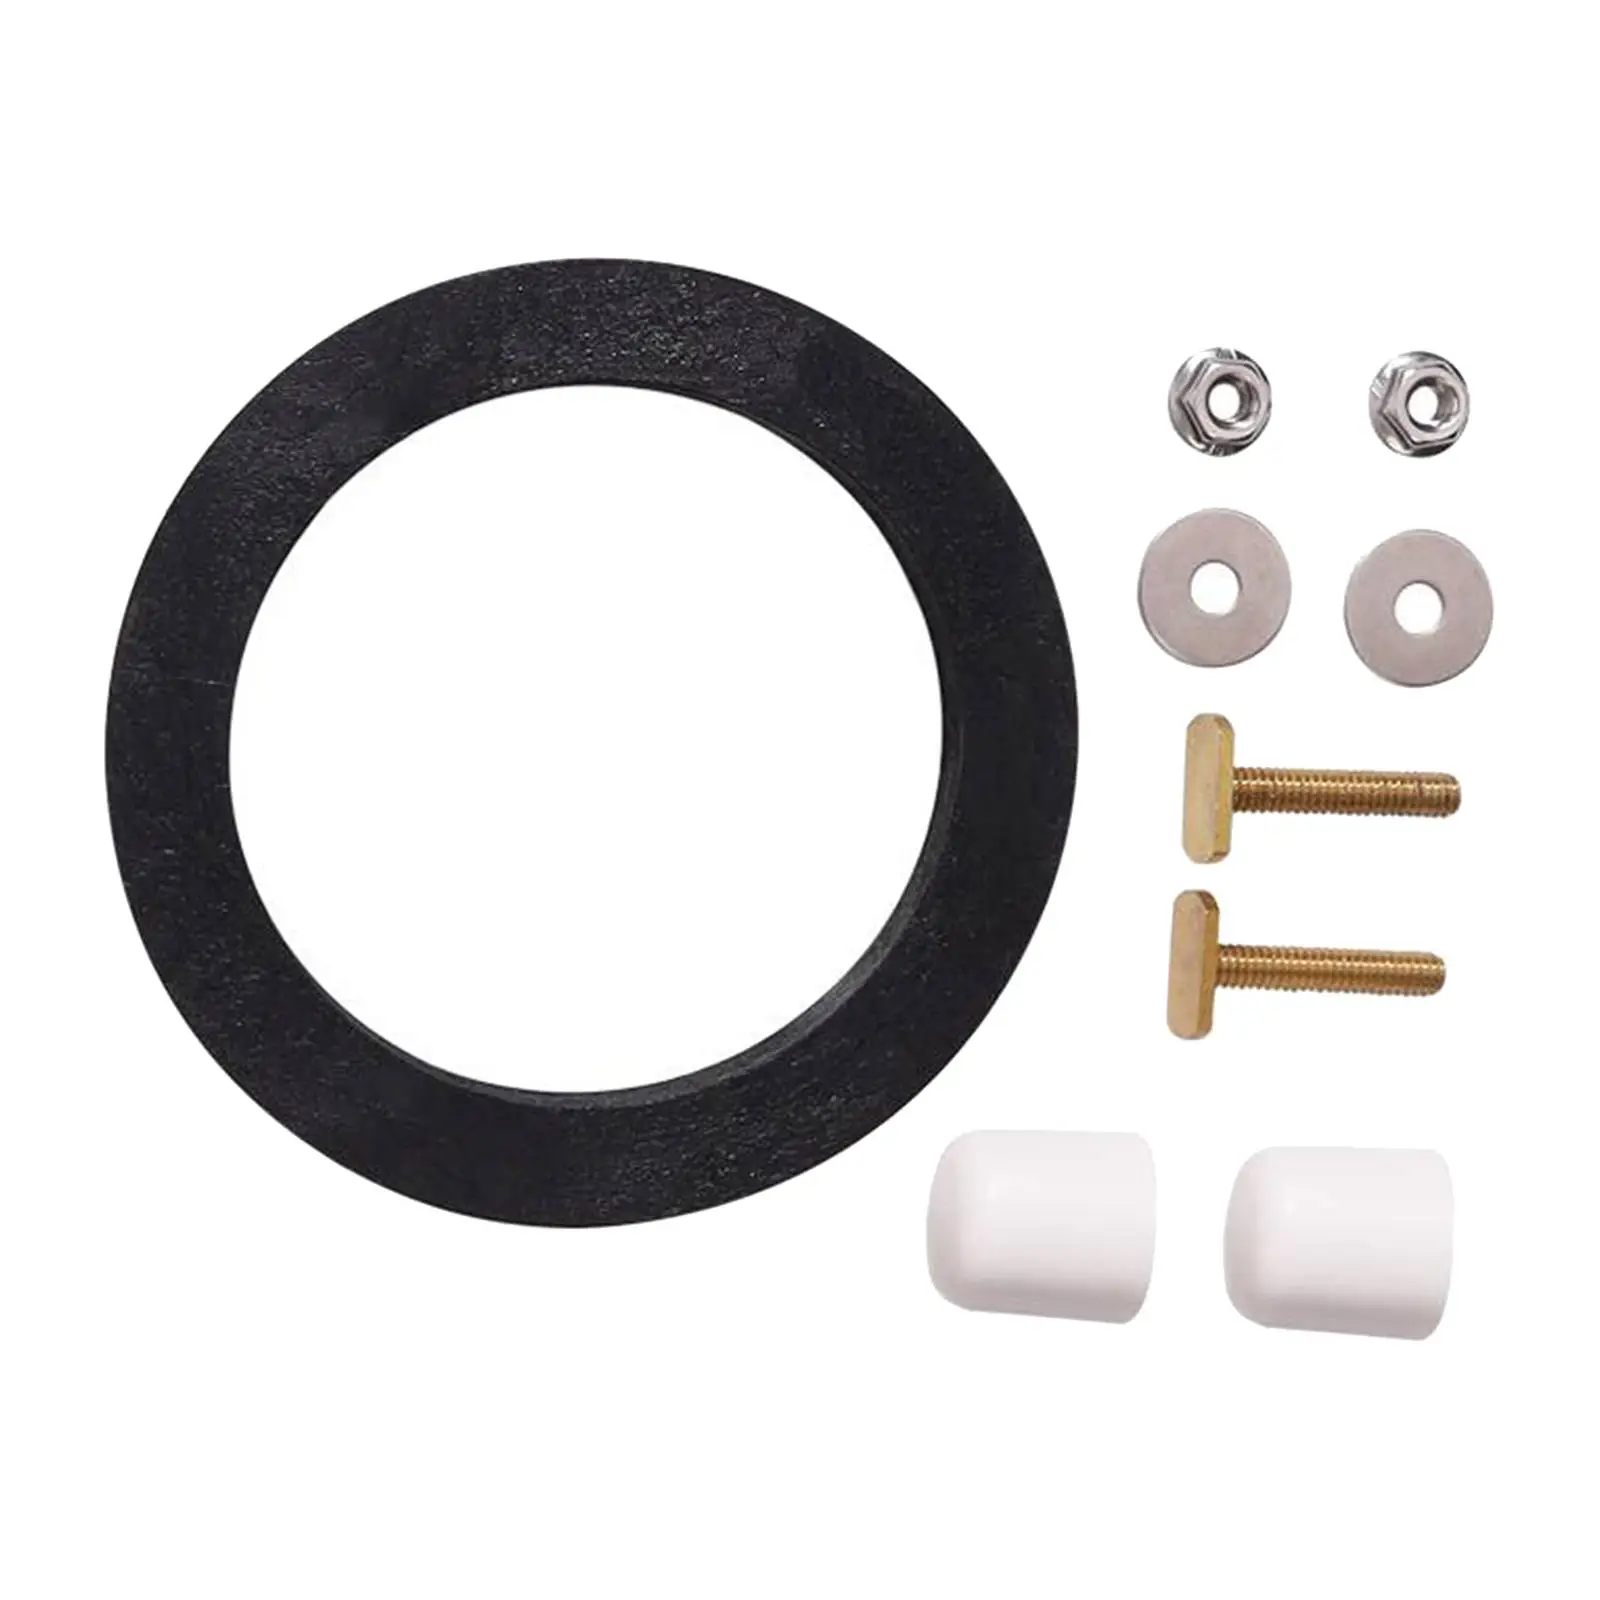 RV Toilet Seal Kit Mounting Hardware and Seal for Dometic 300 Series Toilet Accessory Easy Installation Stable Performance